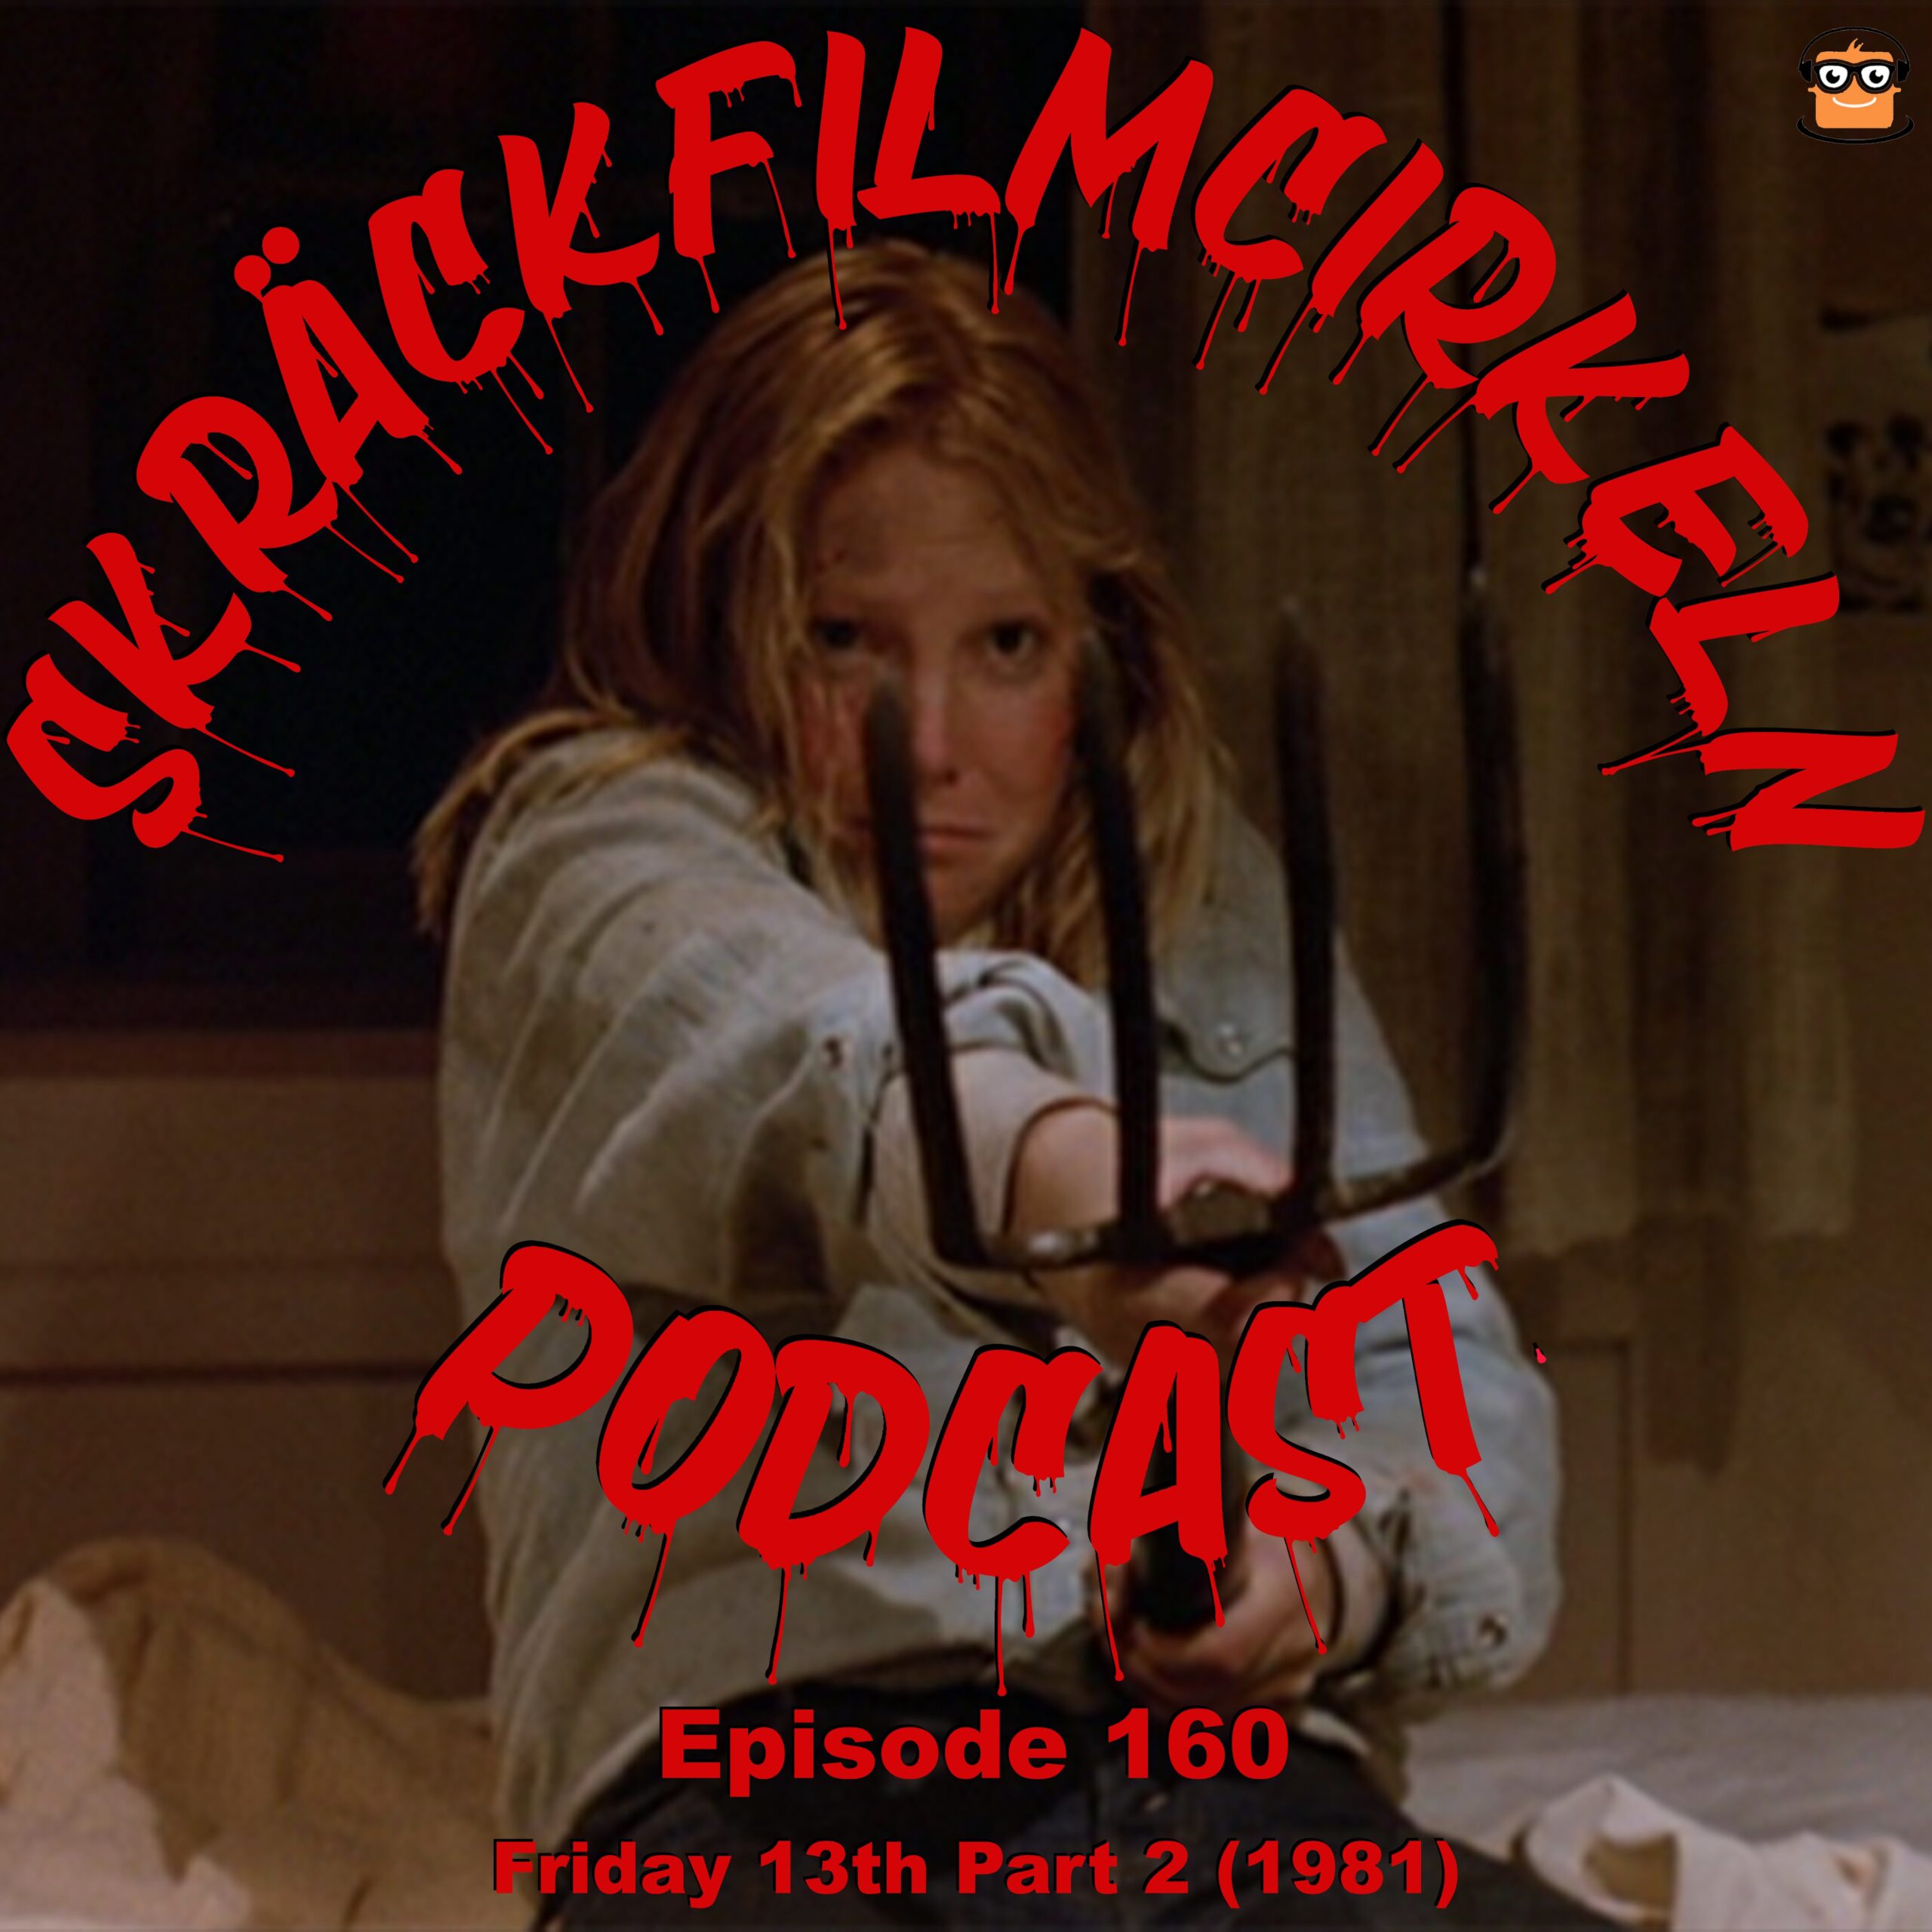 Episode 160 – Friday 13th Part 2 (1981)